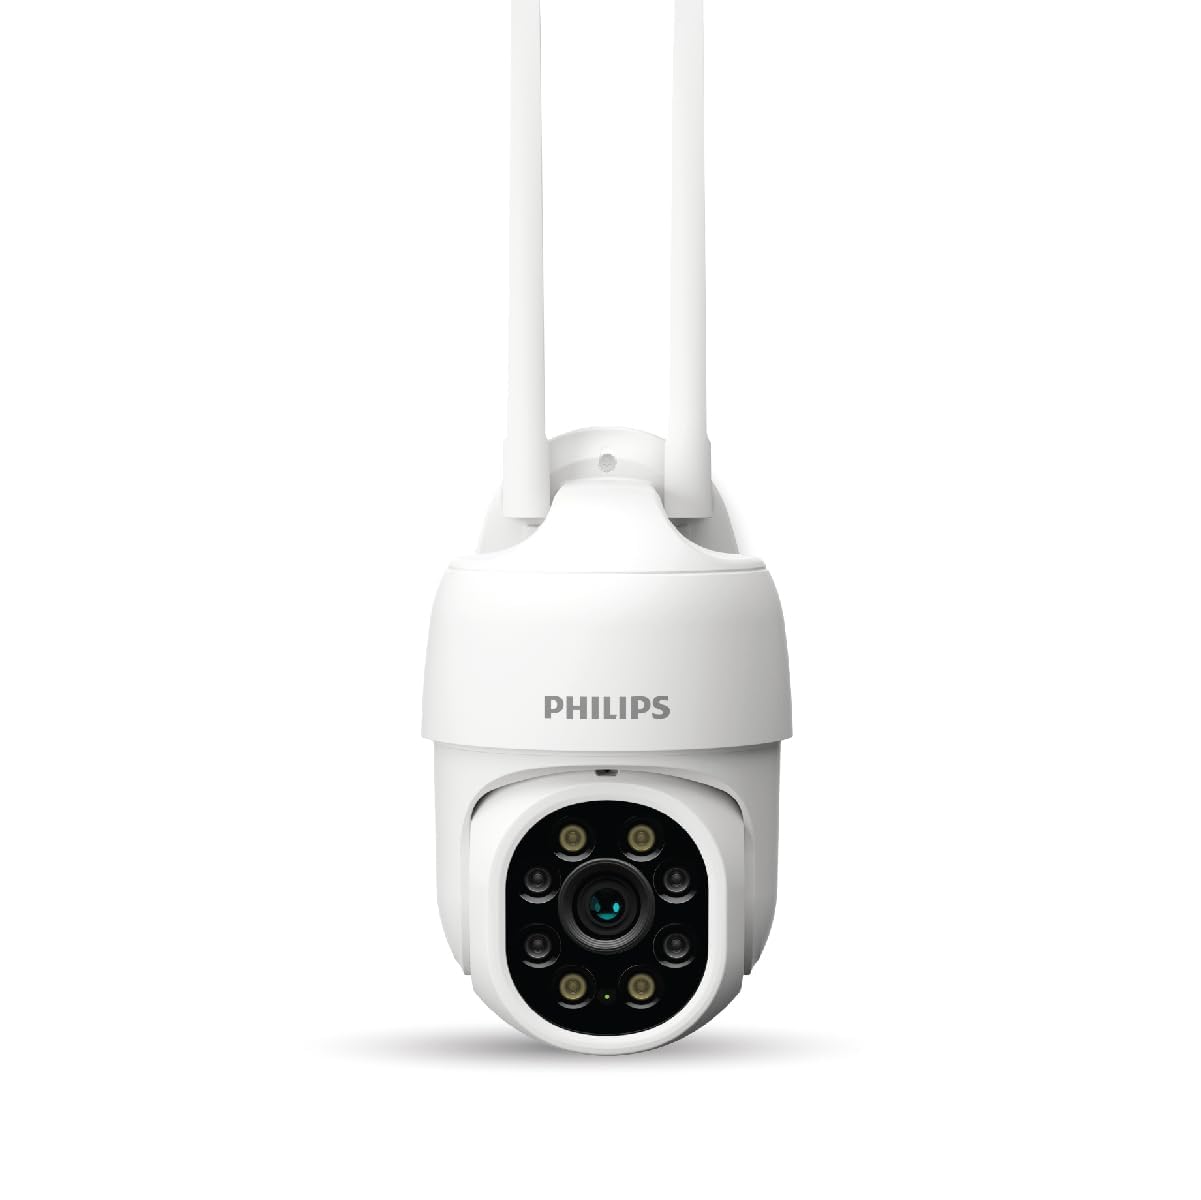 PHILIPS Outdoor Weather Proof IP65 CCTV WiFi Security Camera | PTZ | Colour Night Vision | 2 Way Talk | AES-128bit Encryption | 2 Year Brand Warranty | HSP 3800